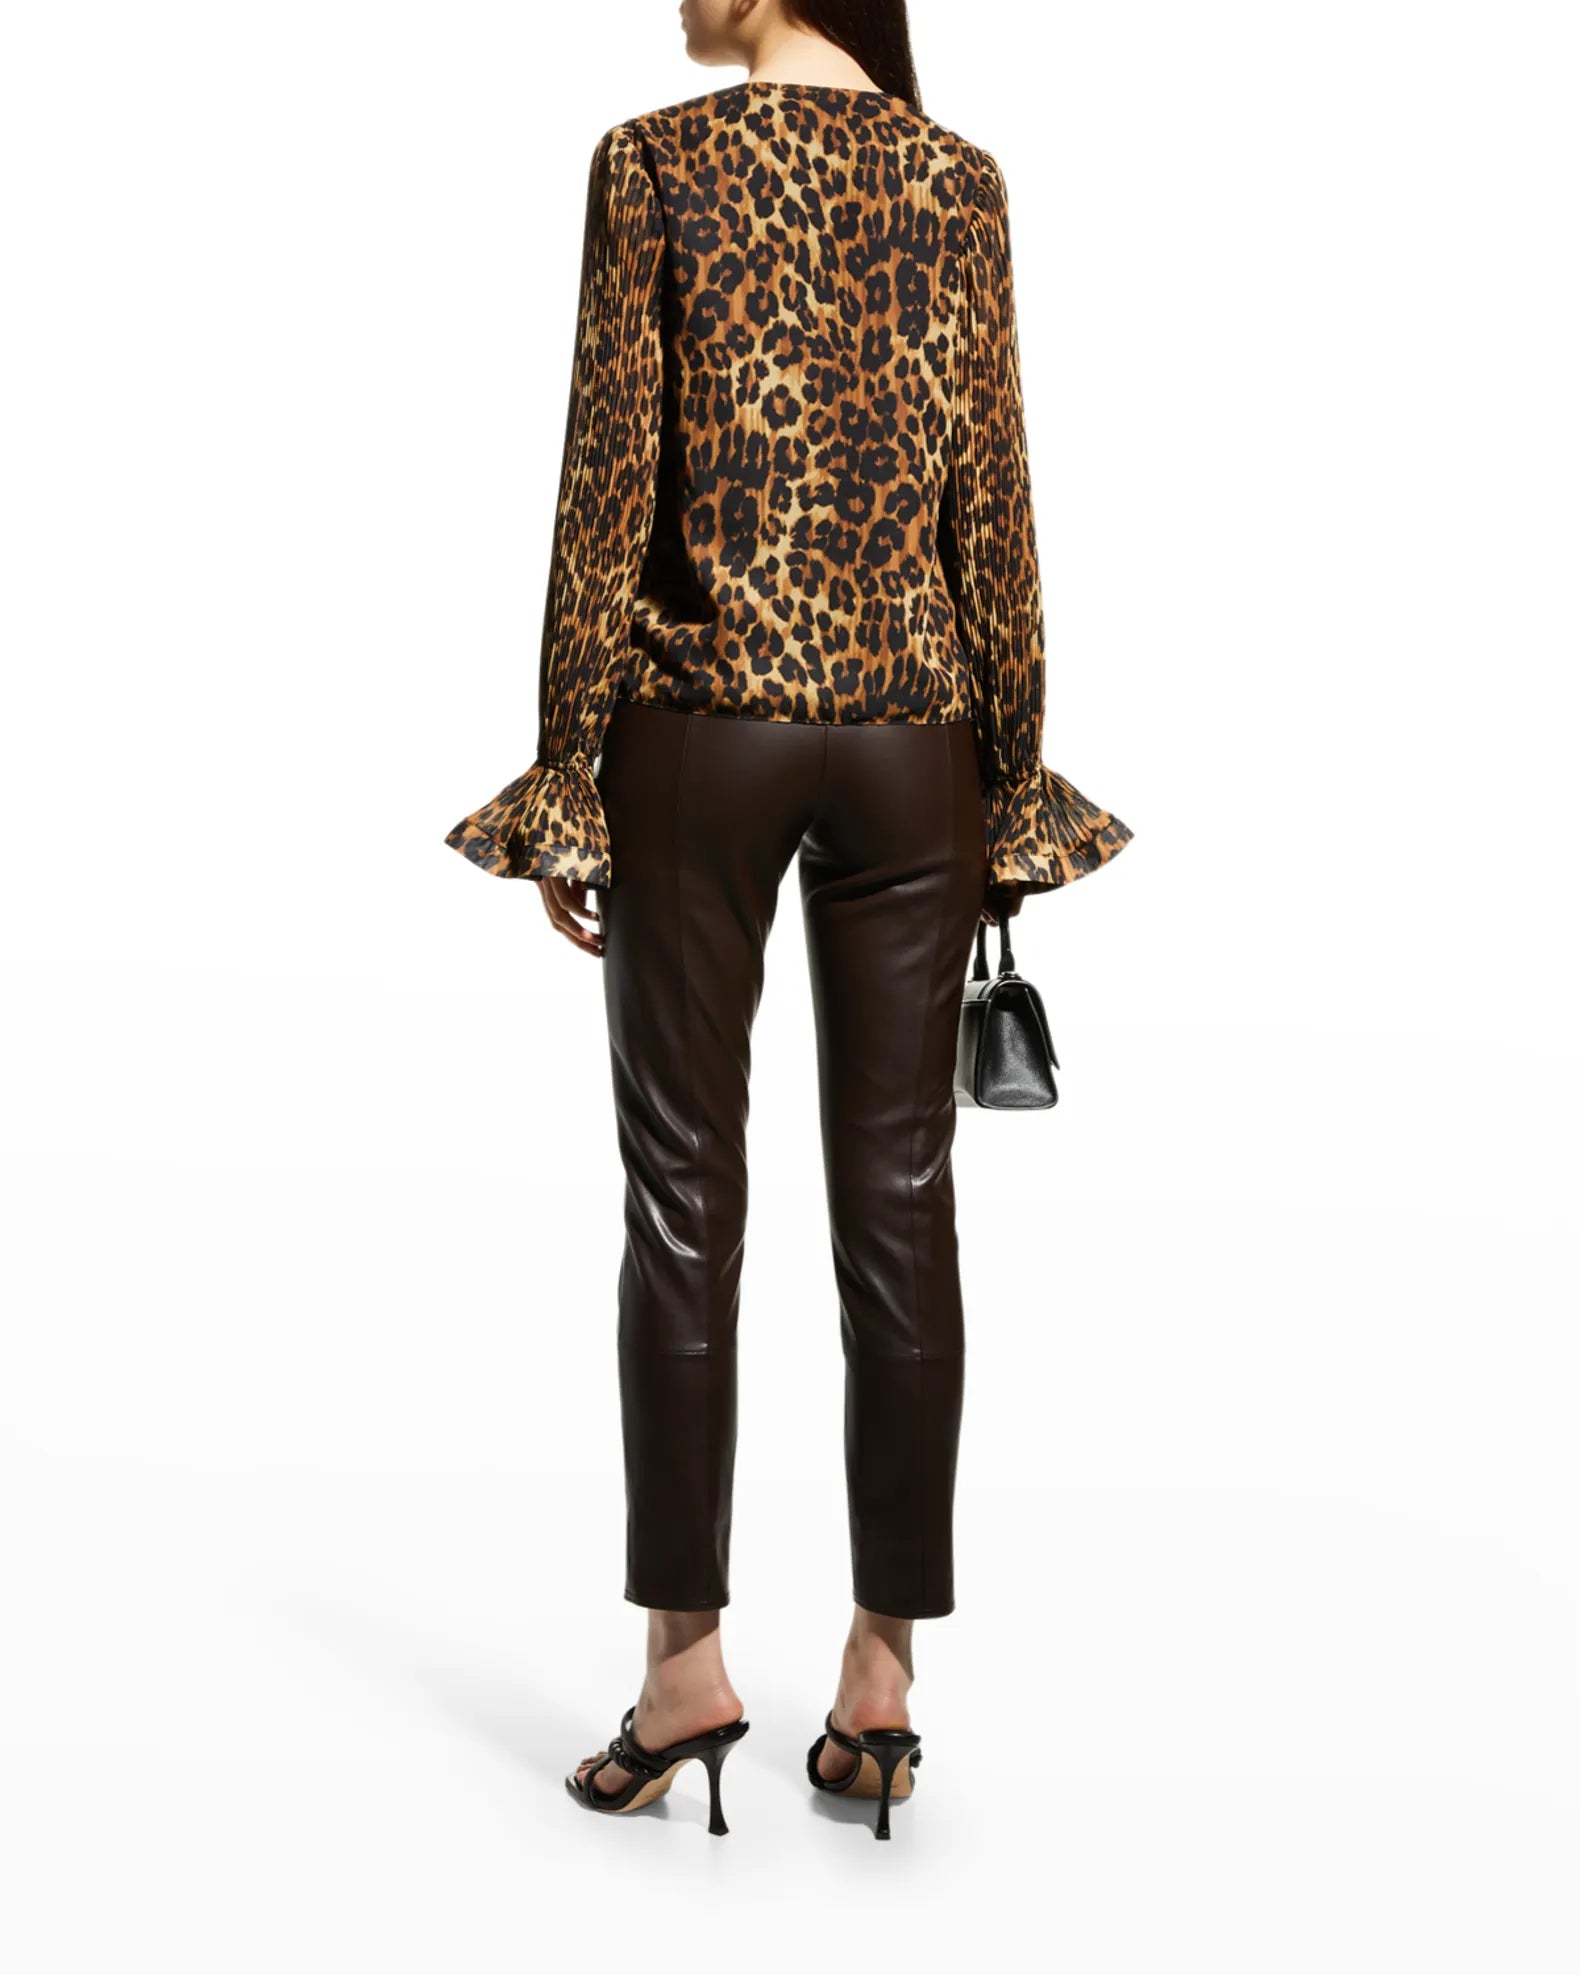 Milly Greer Pleated-Sleeve Leopard Print Blouse